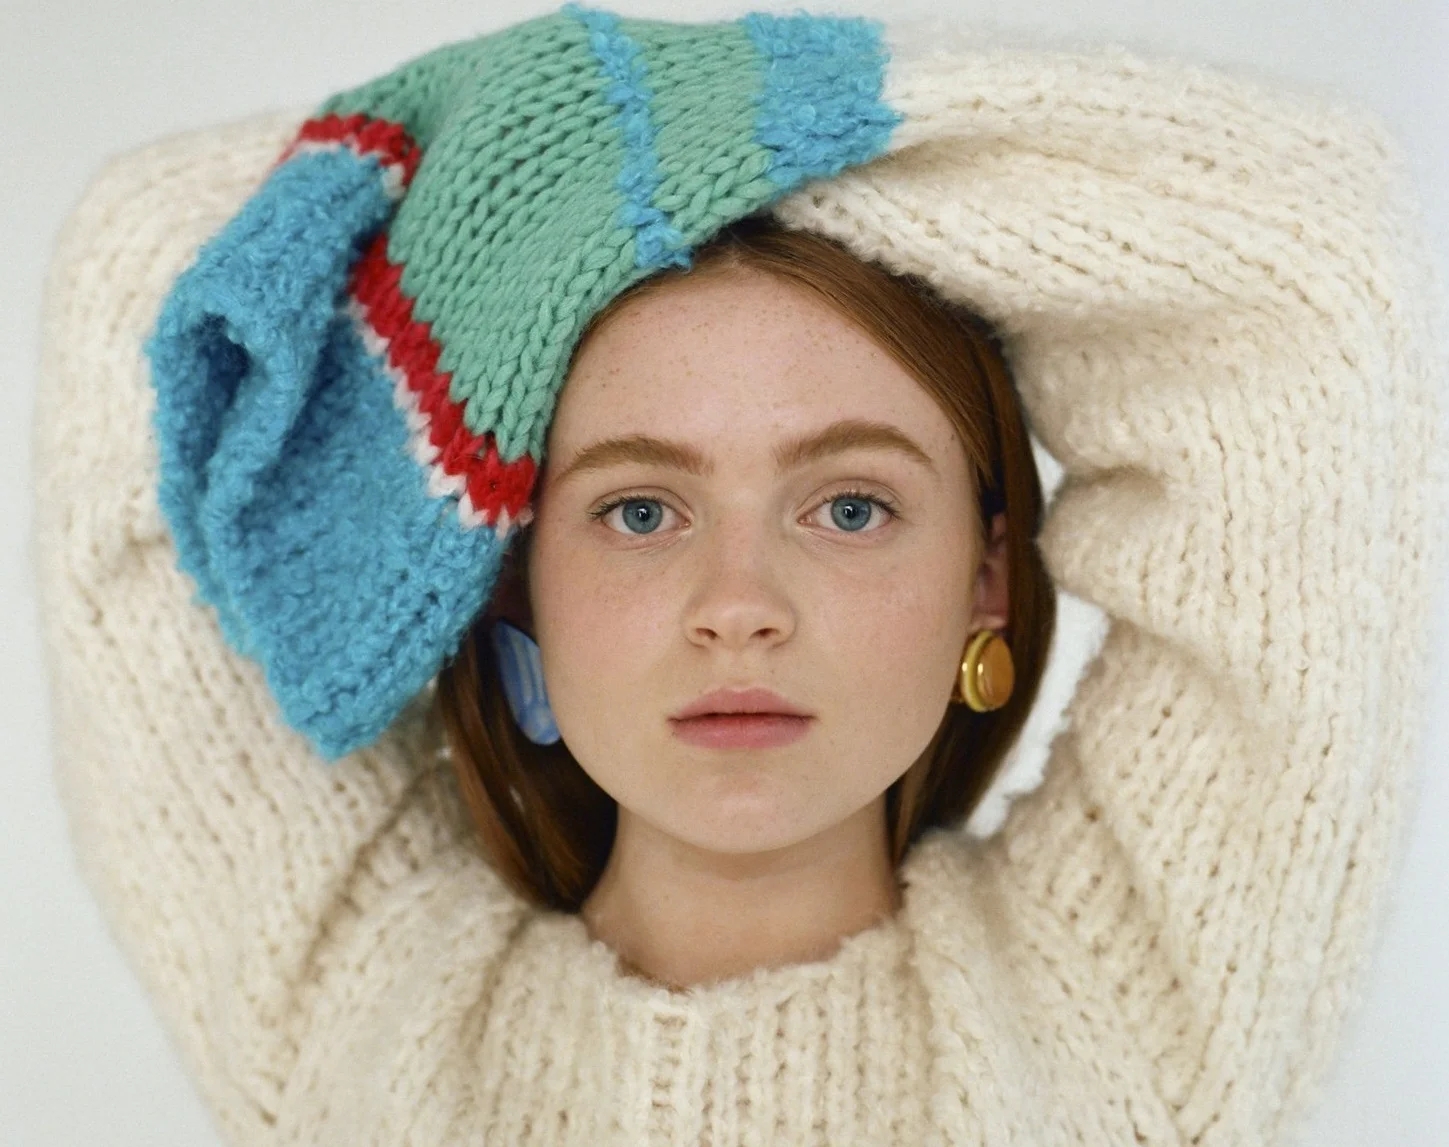 Sadie Sink Women Actress Looking At Viewer Redhead Sweater Earring Freckles 1449x1147